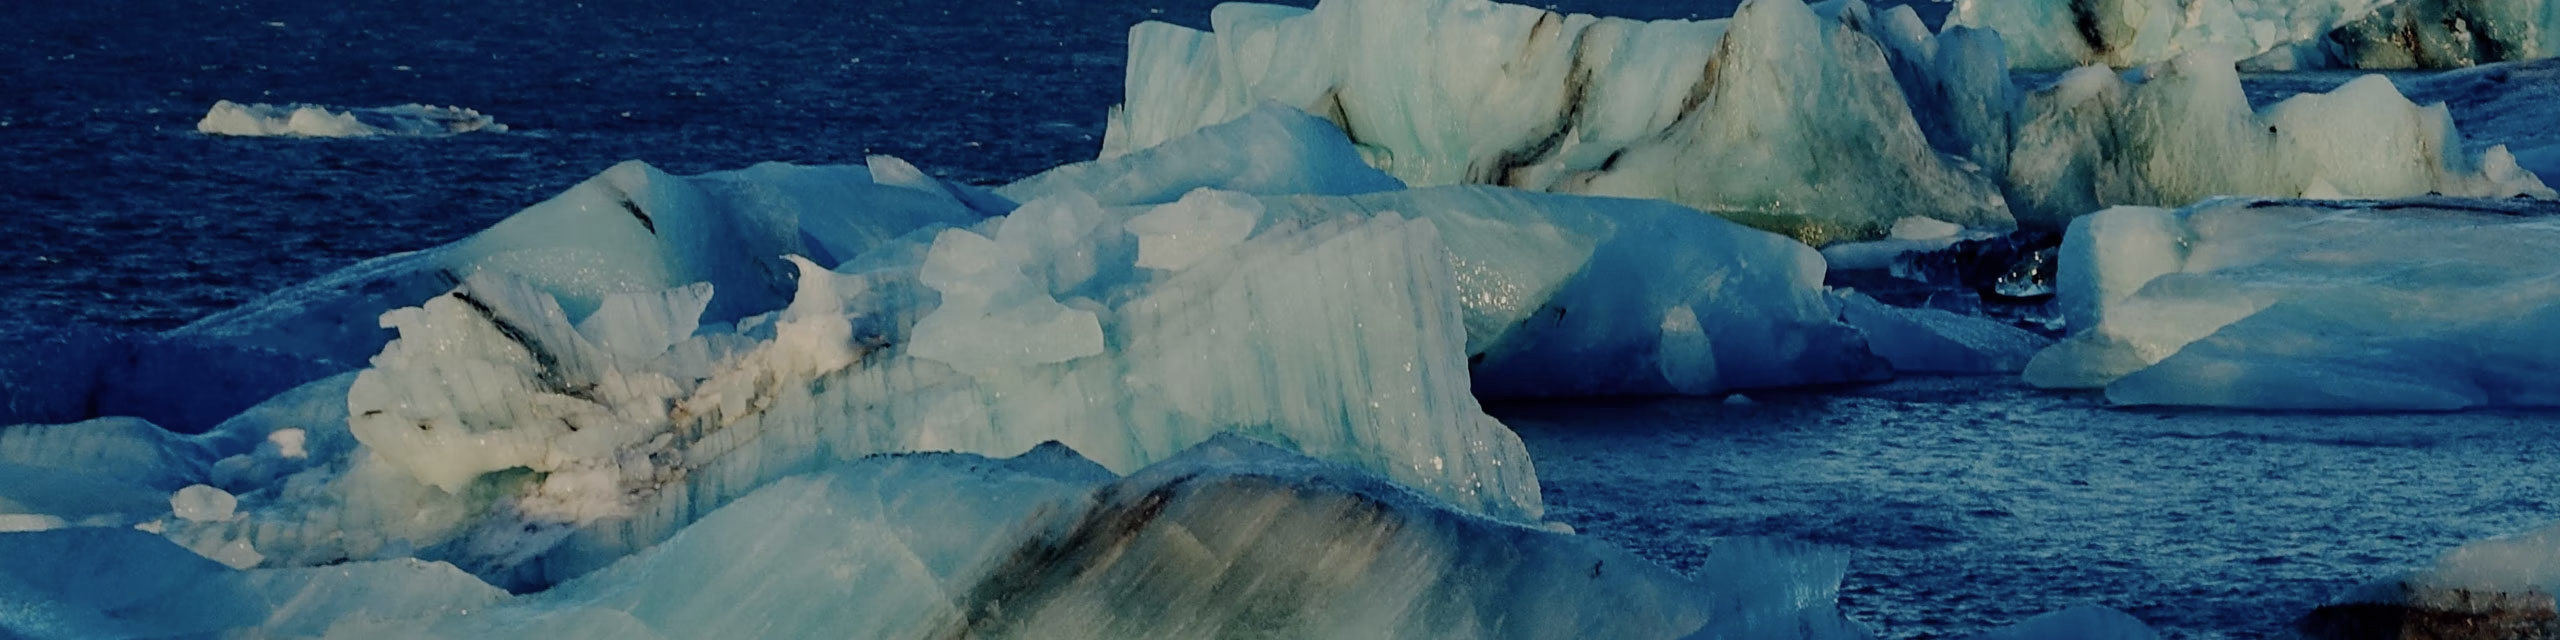 The global warming effect on glacial ice.